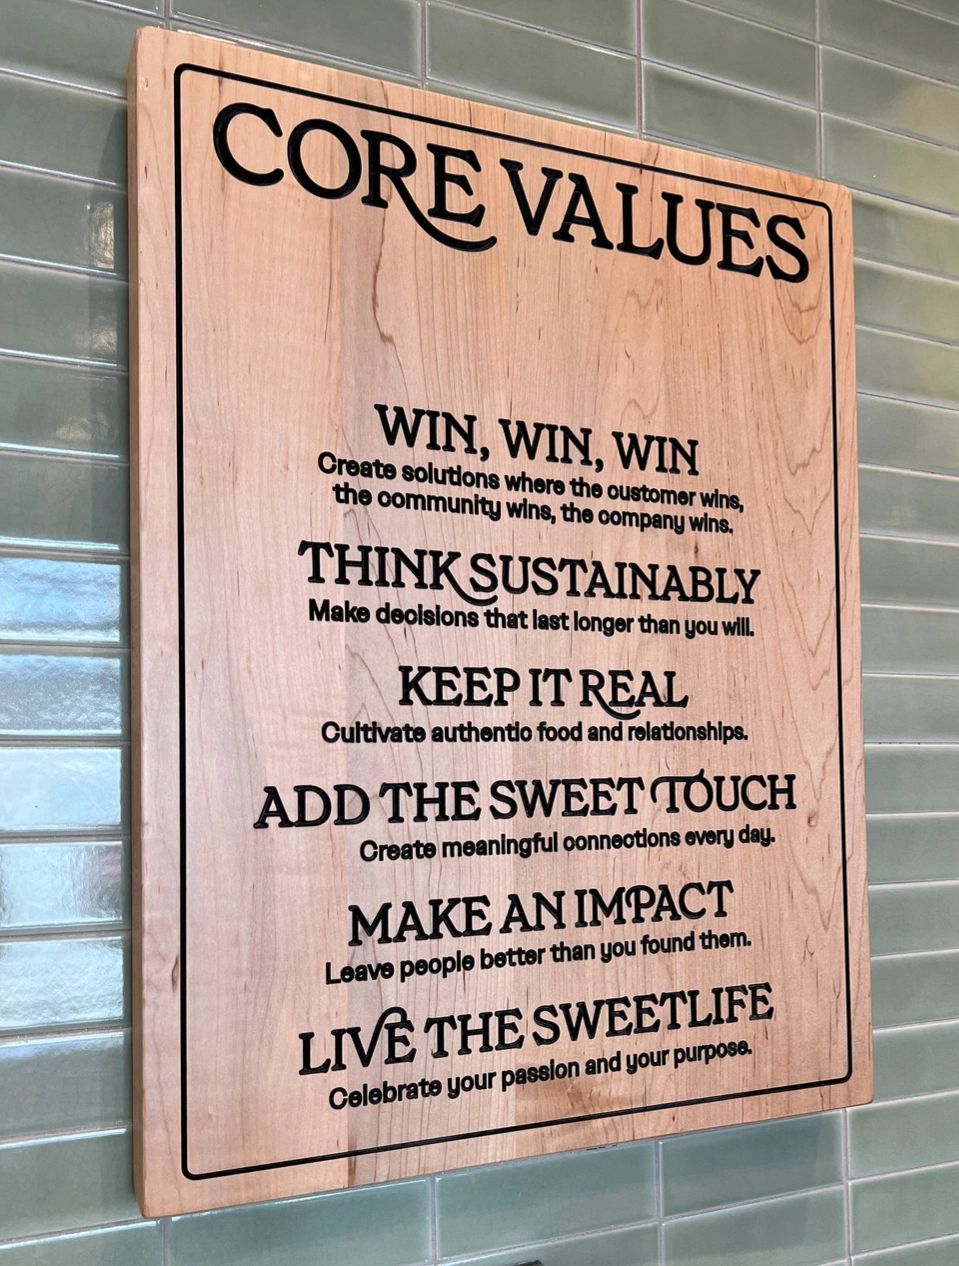  Winning With Core Values: How core values help you win